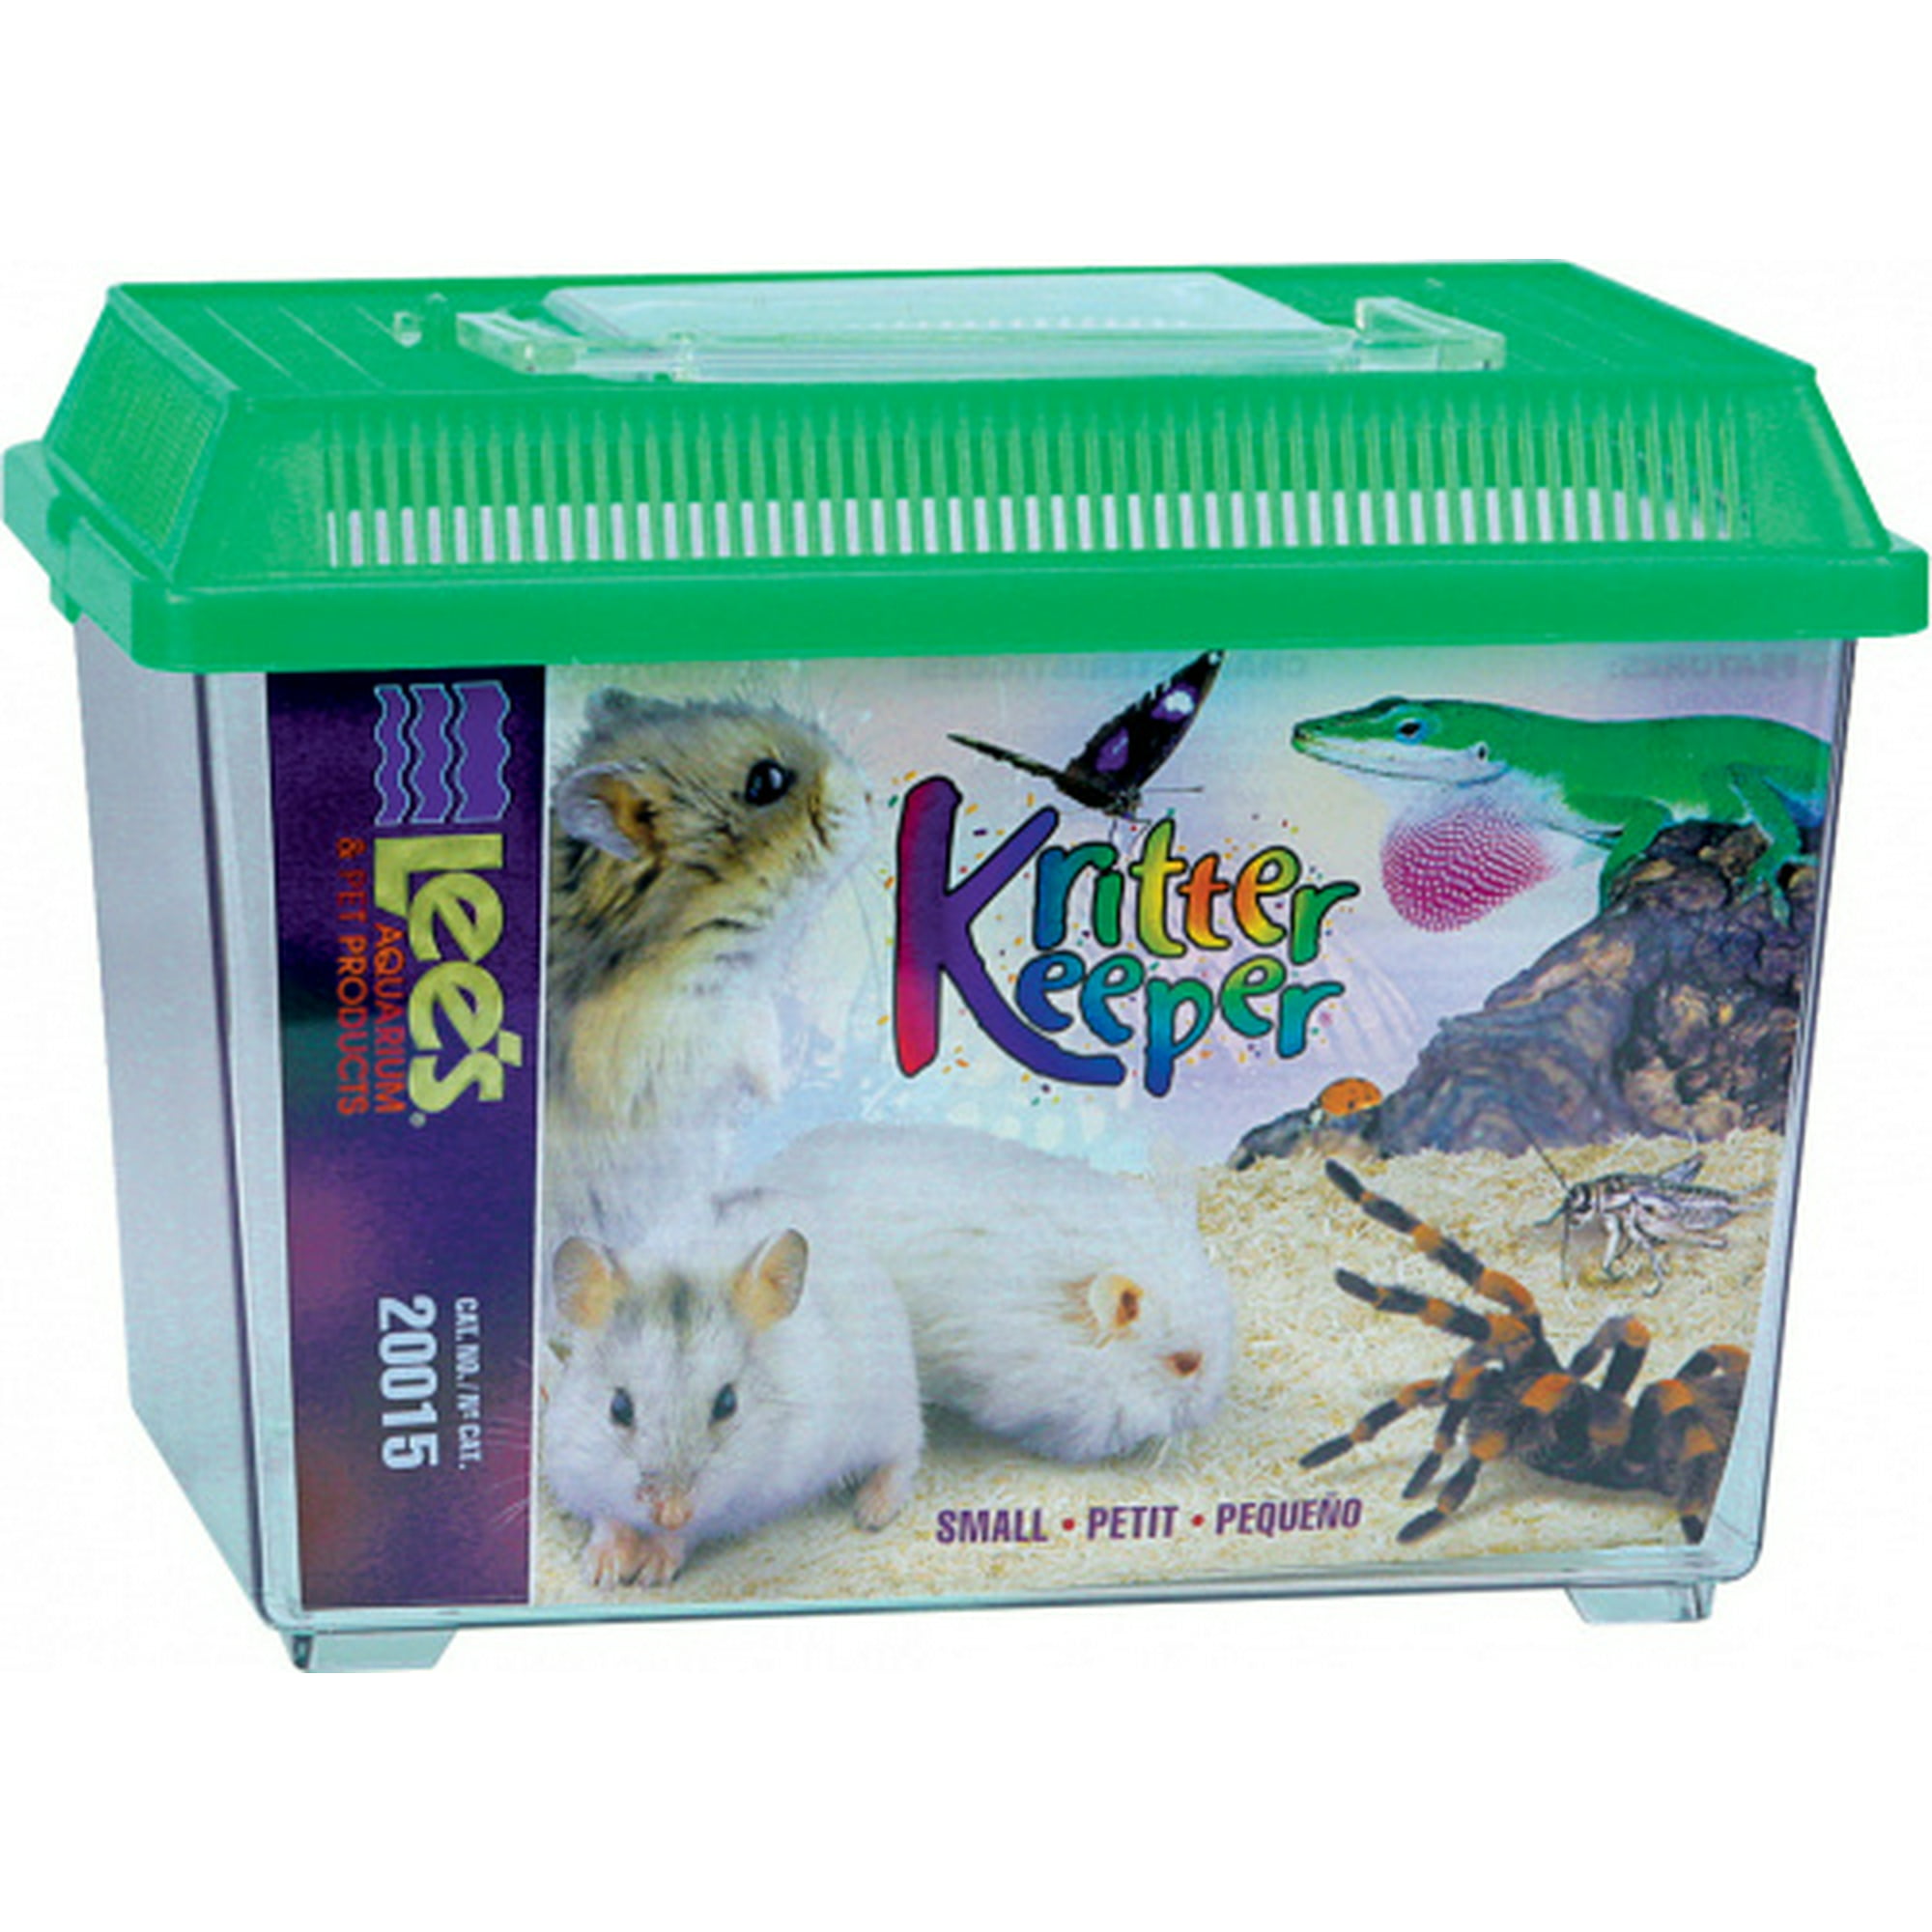 Lee's Aquarium & Pet Products Kritter Keeper Reptile House, X